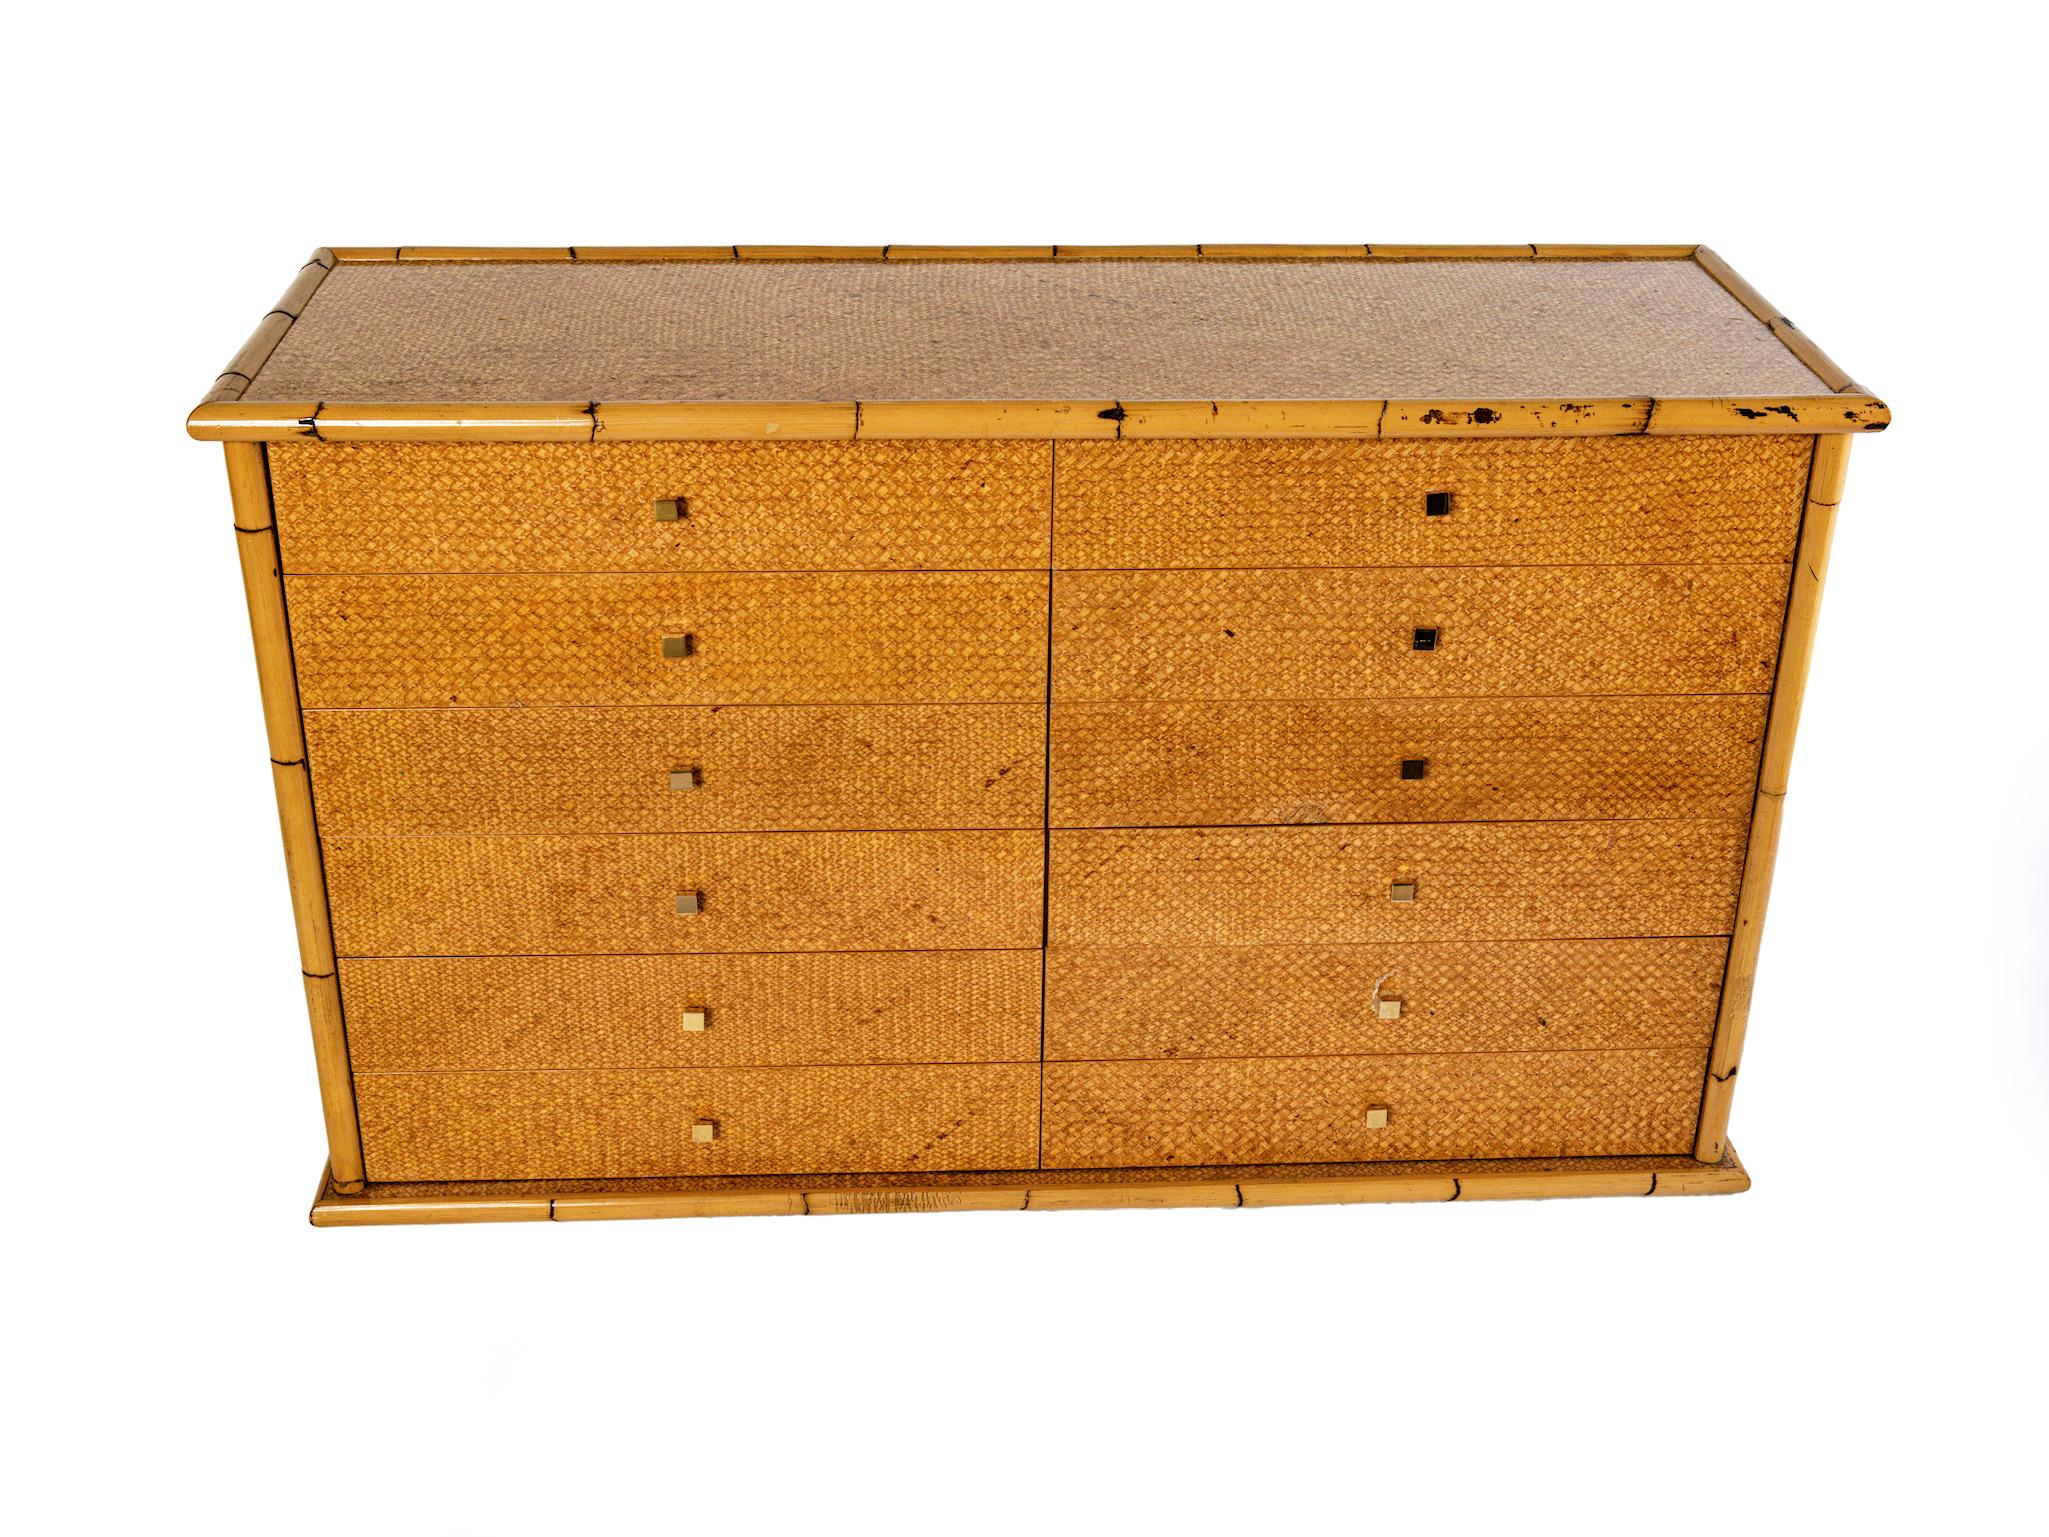 An Exceptional mid century twelve-drawer rattan sideboard with brass knob handles. It would be great in a dining room or pantry to store utensils, or as server.